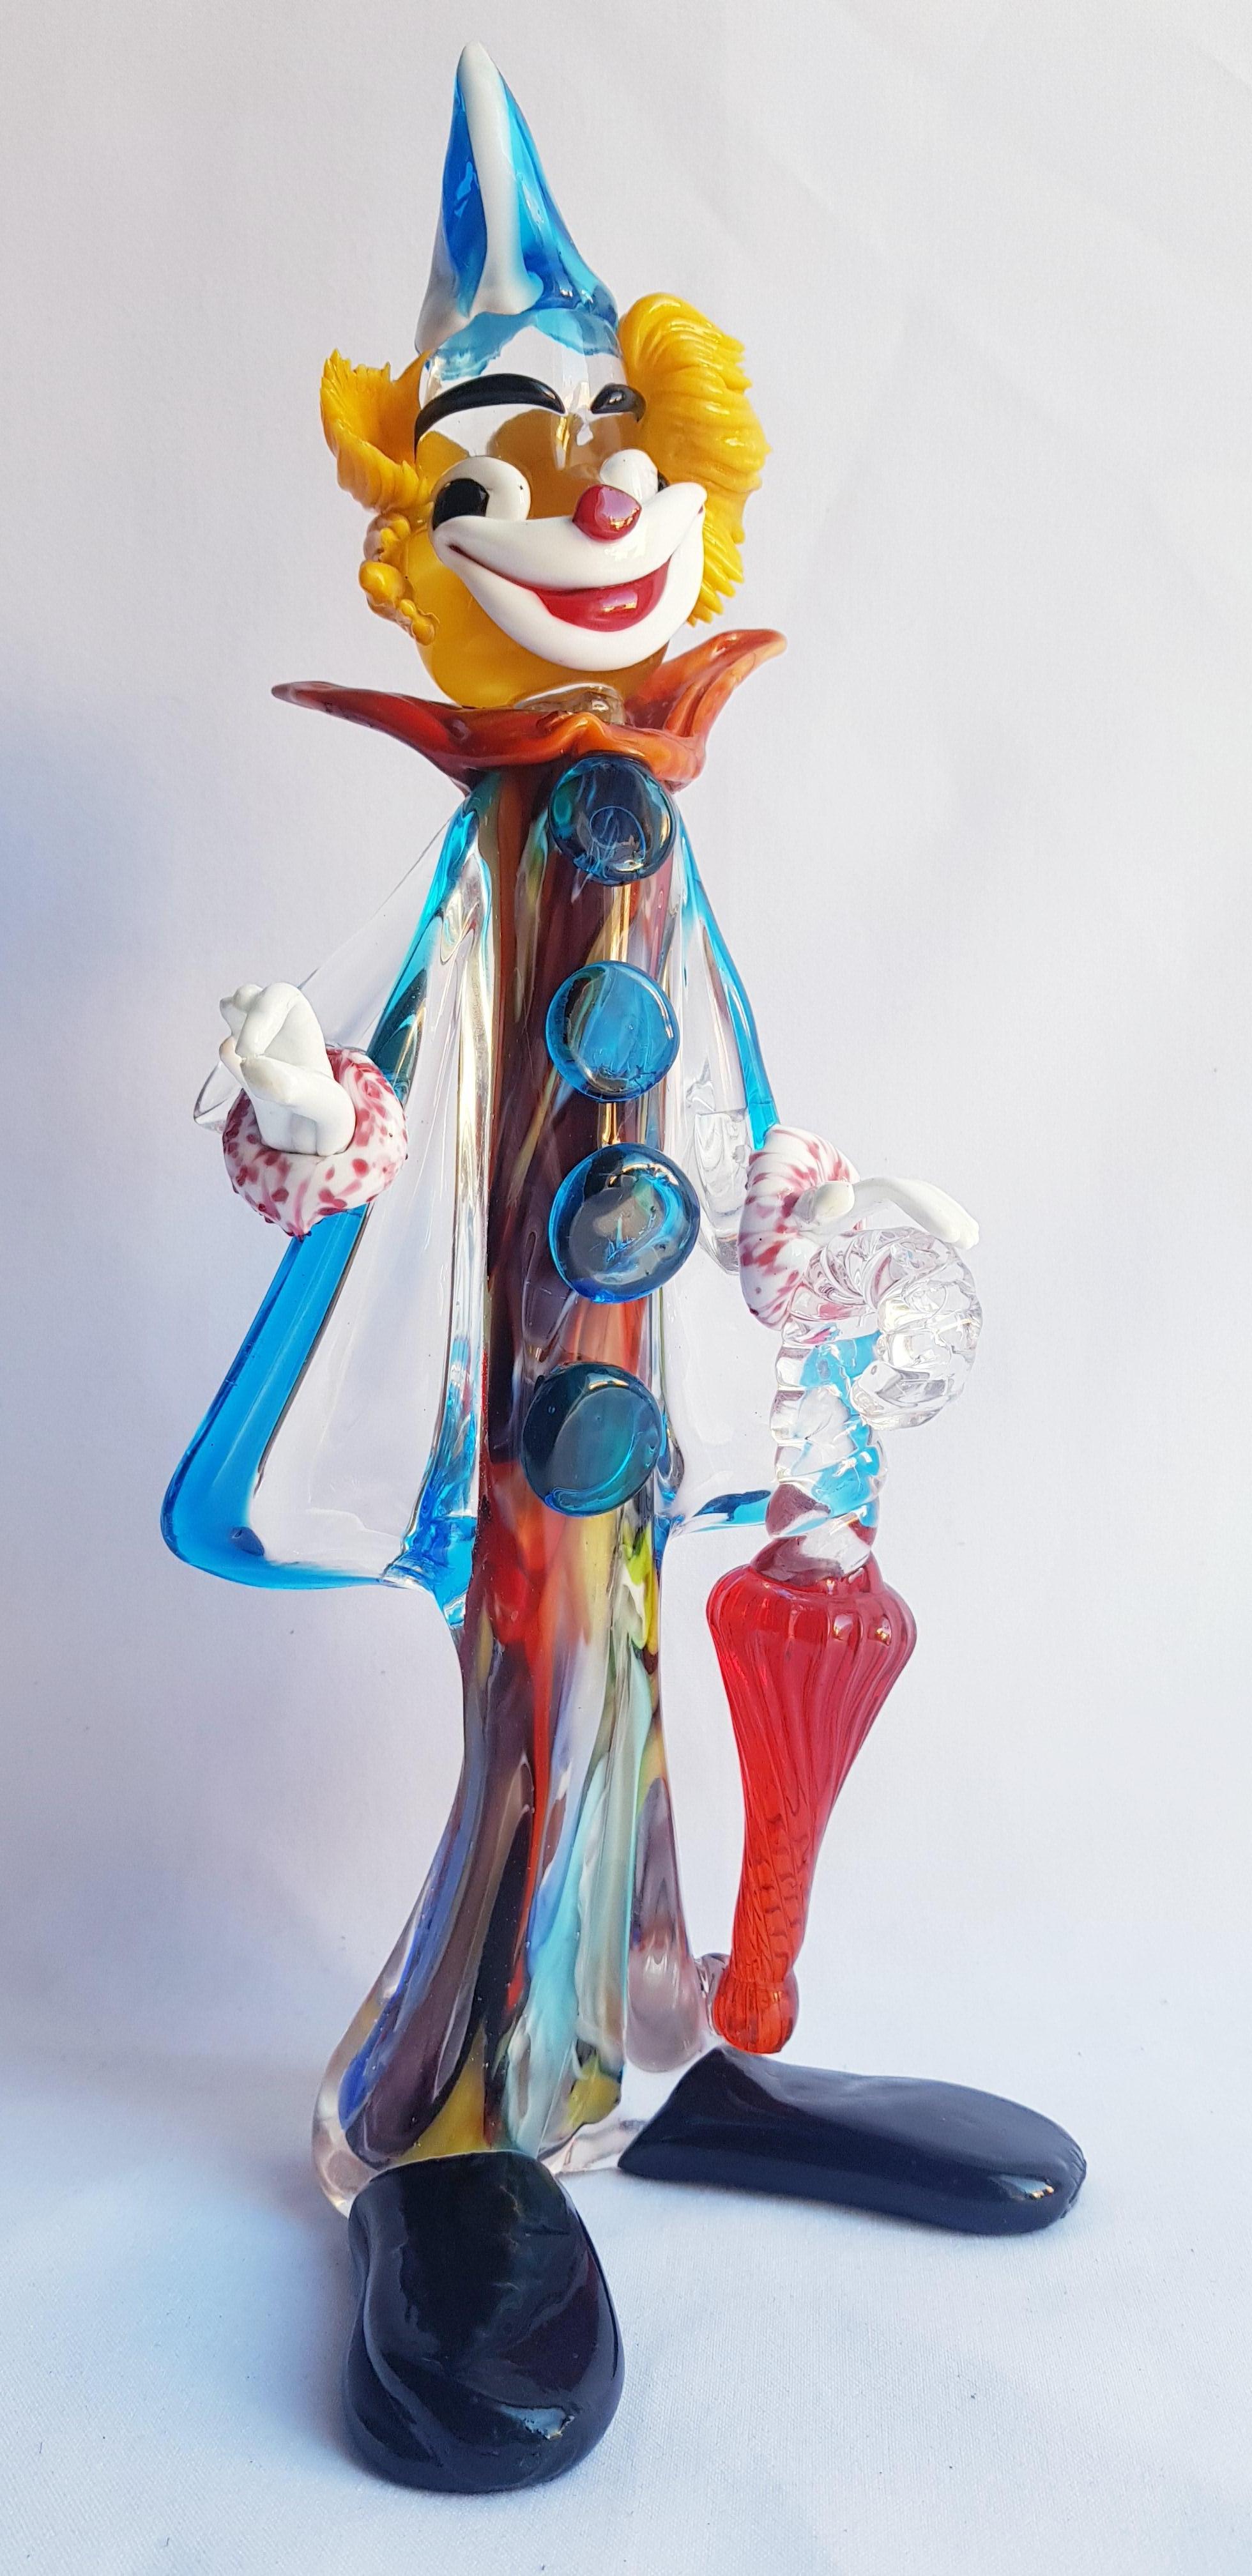 Genuine Murano glass sommerso clown signed by the artist Stefano Toso, years 1960-1970. In excellent condition.